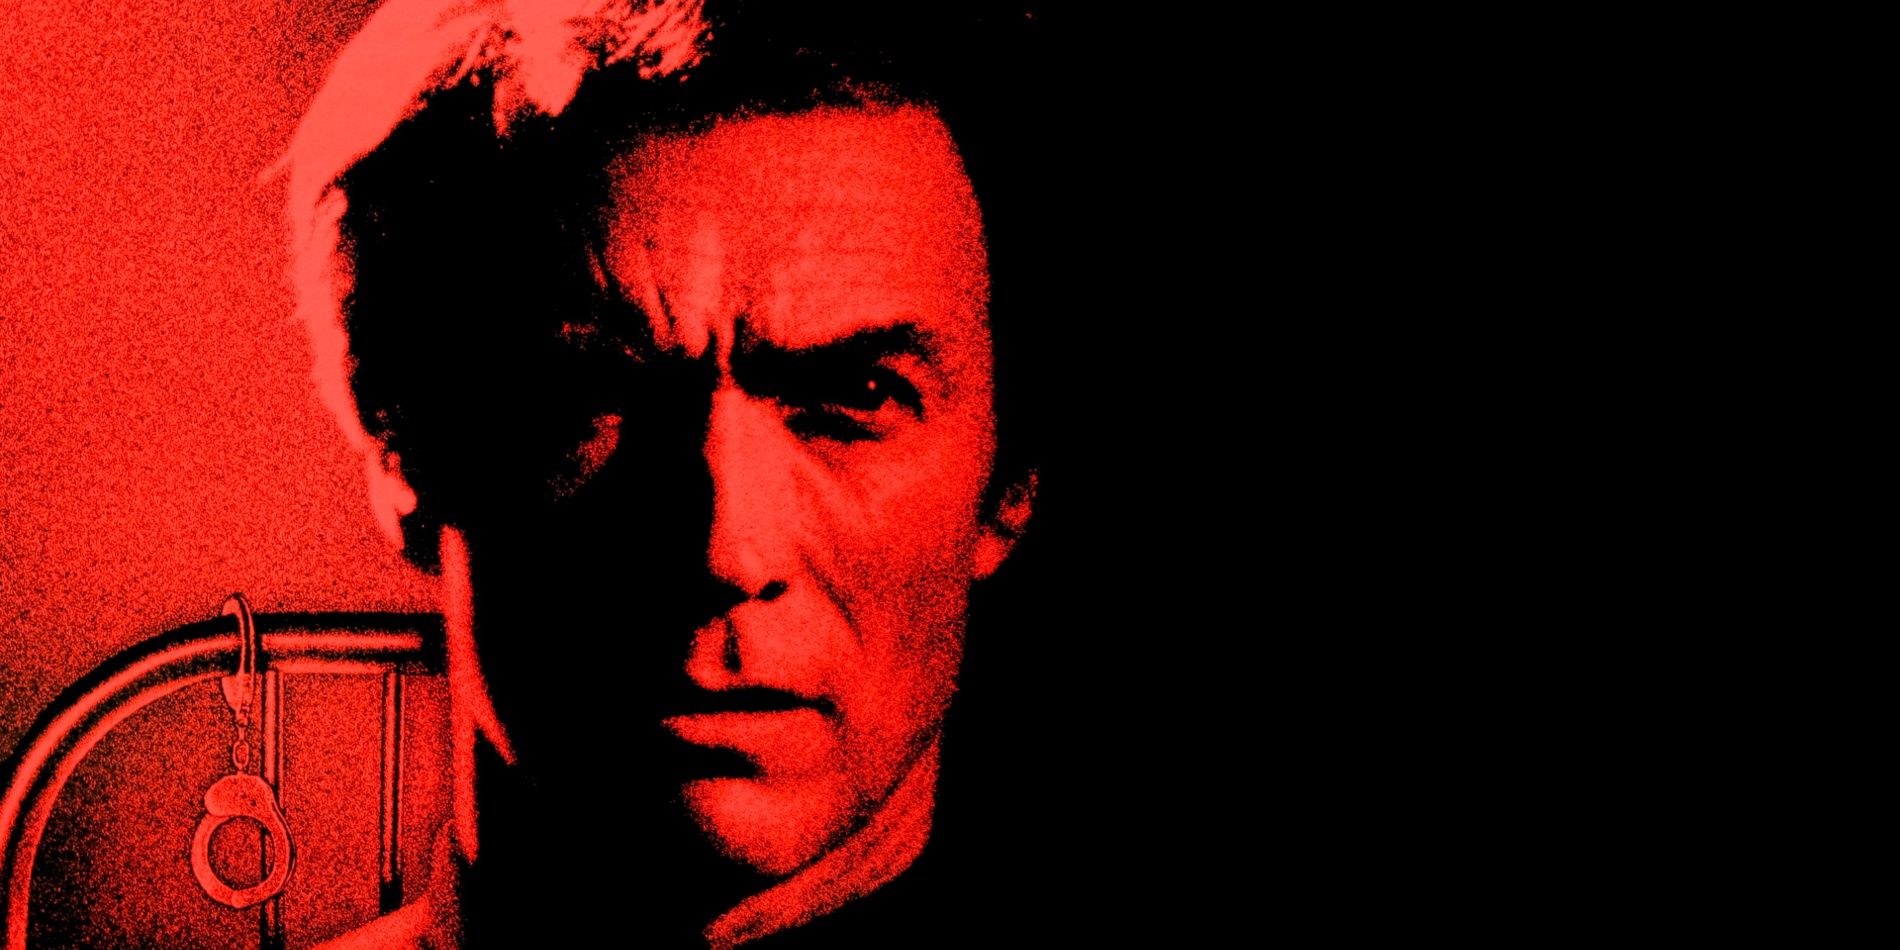 A poster for Tightrope featuring Clint Eastwood